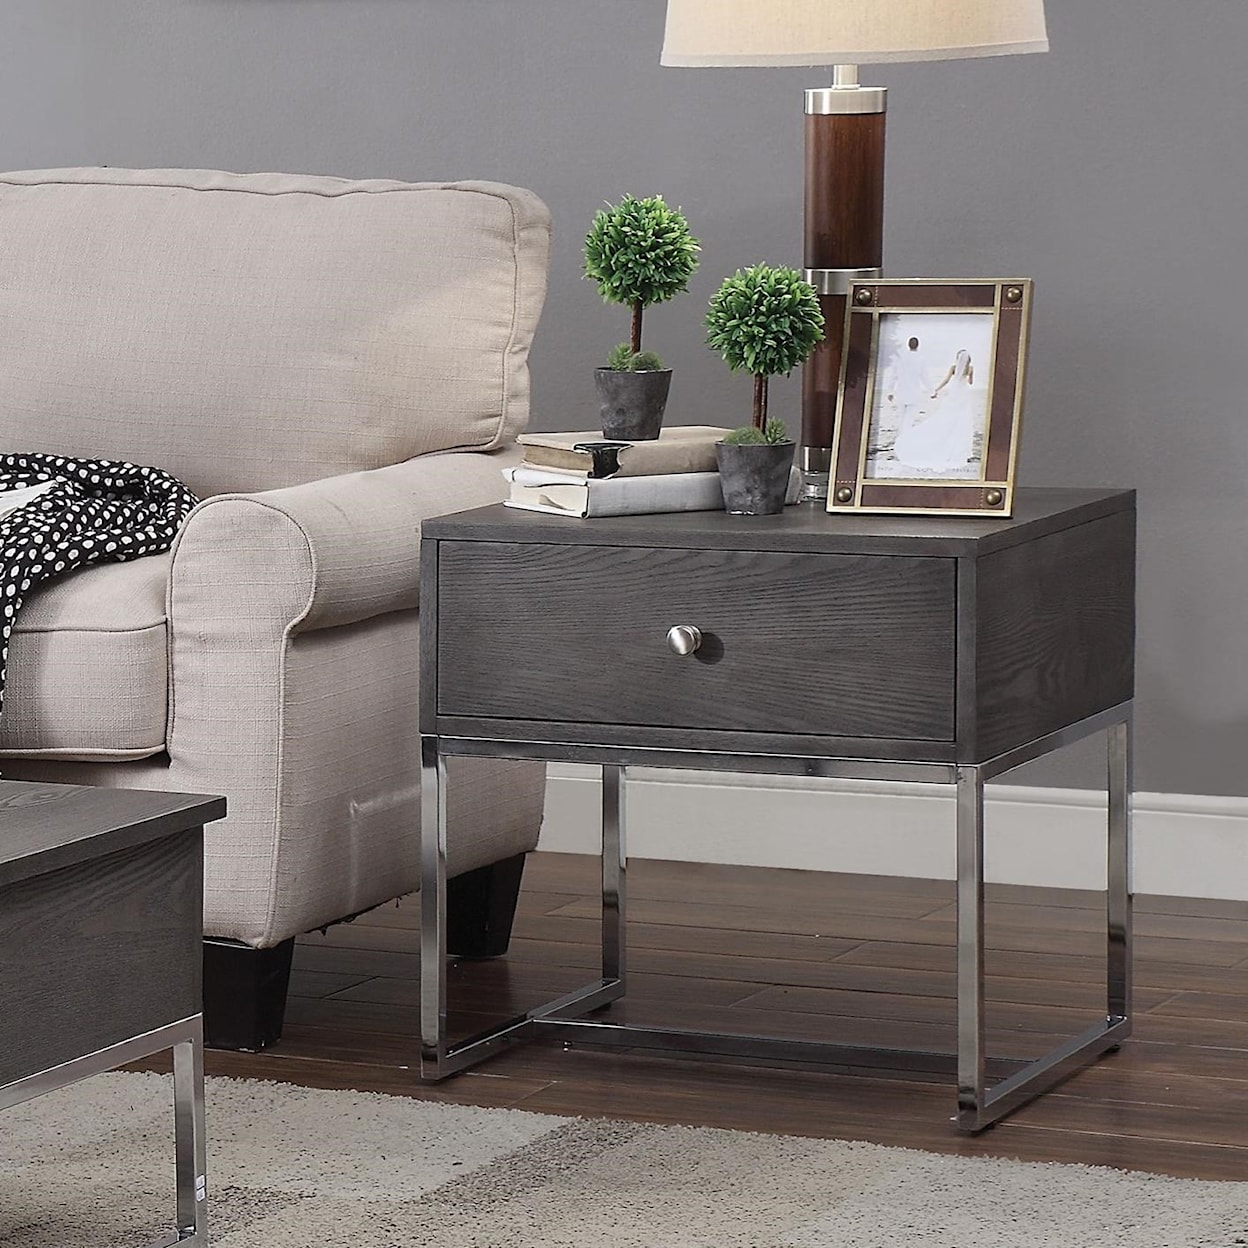 Acme Furniture Iban End Table